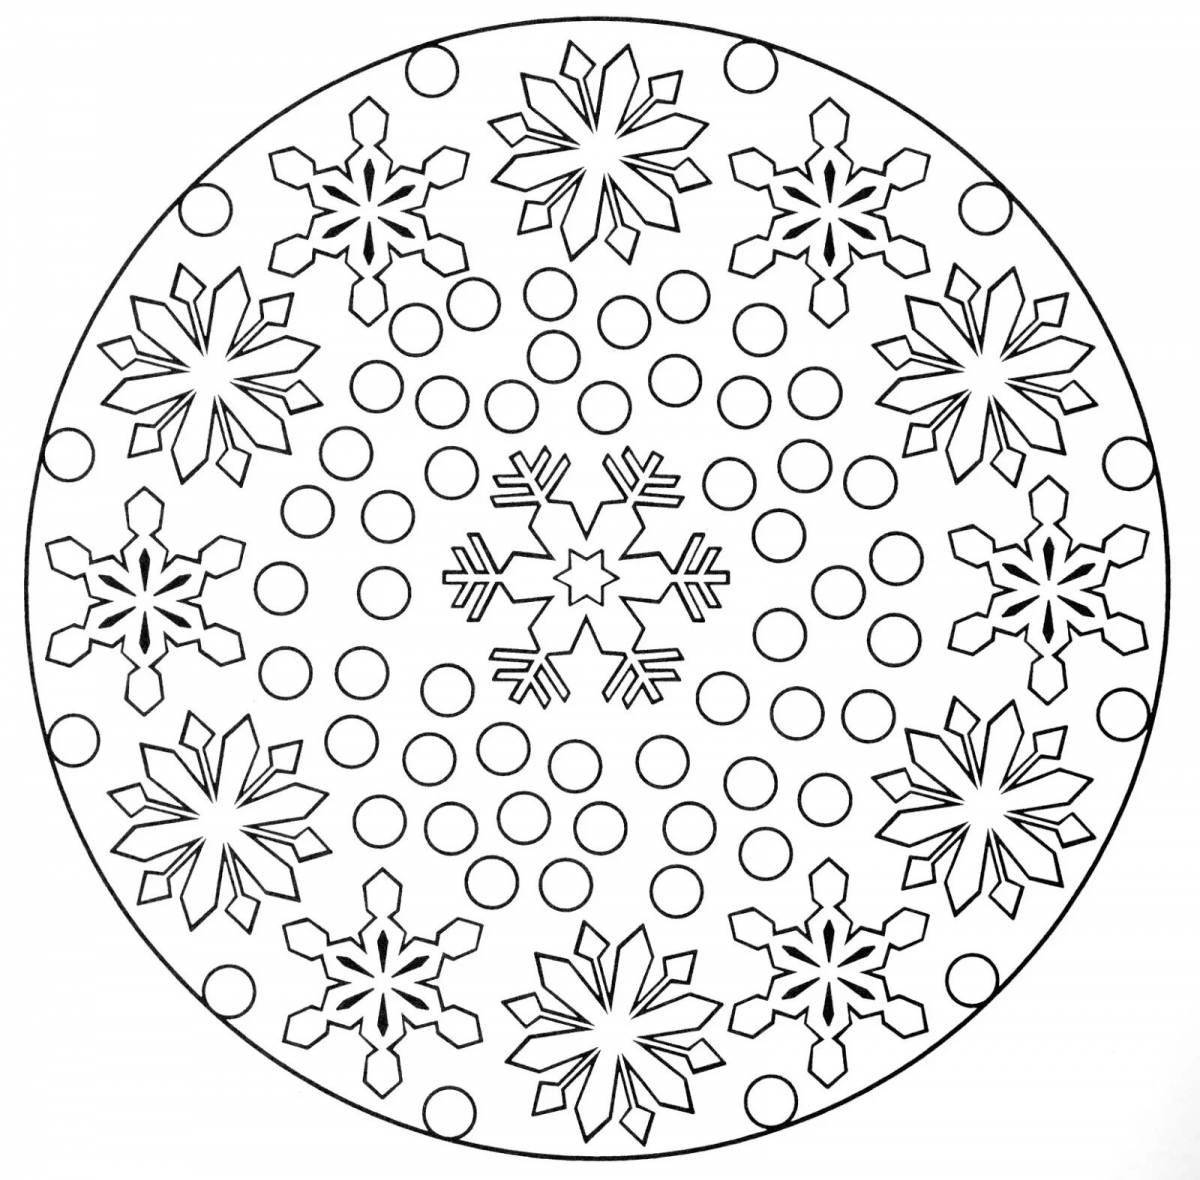 Children's shining winter patterns coloring book